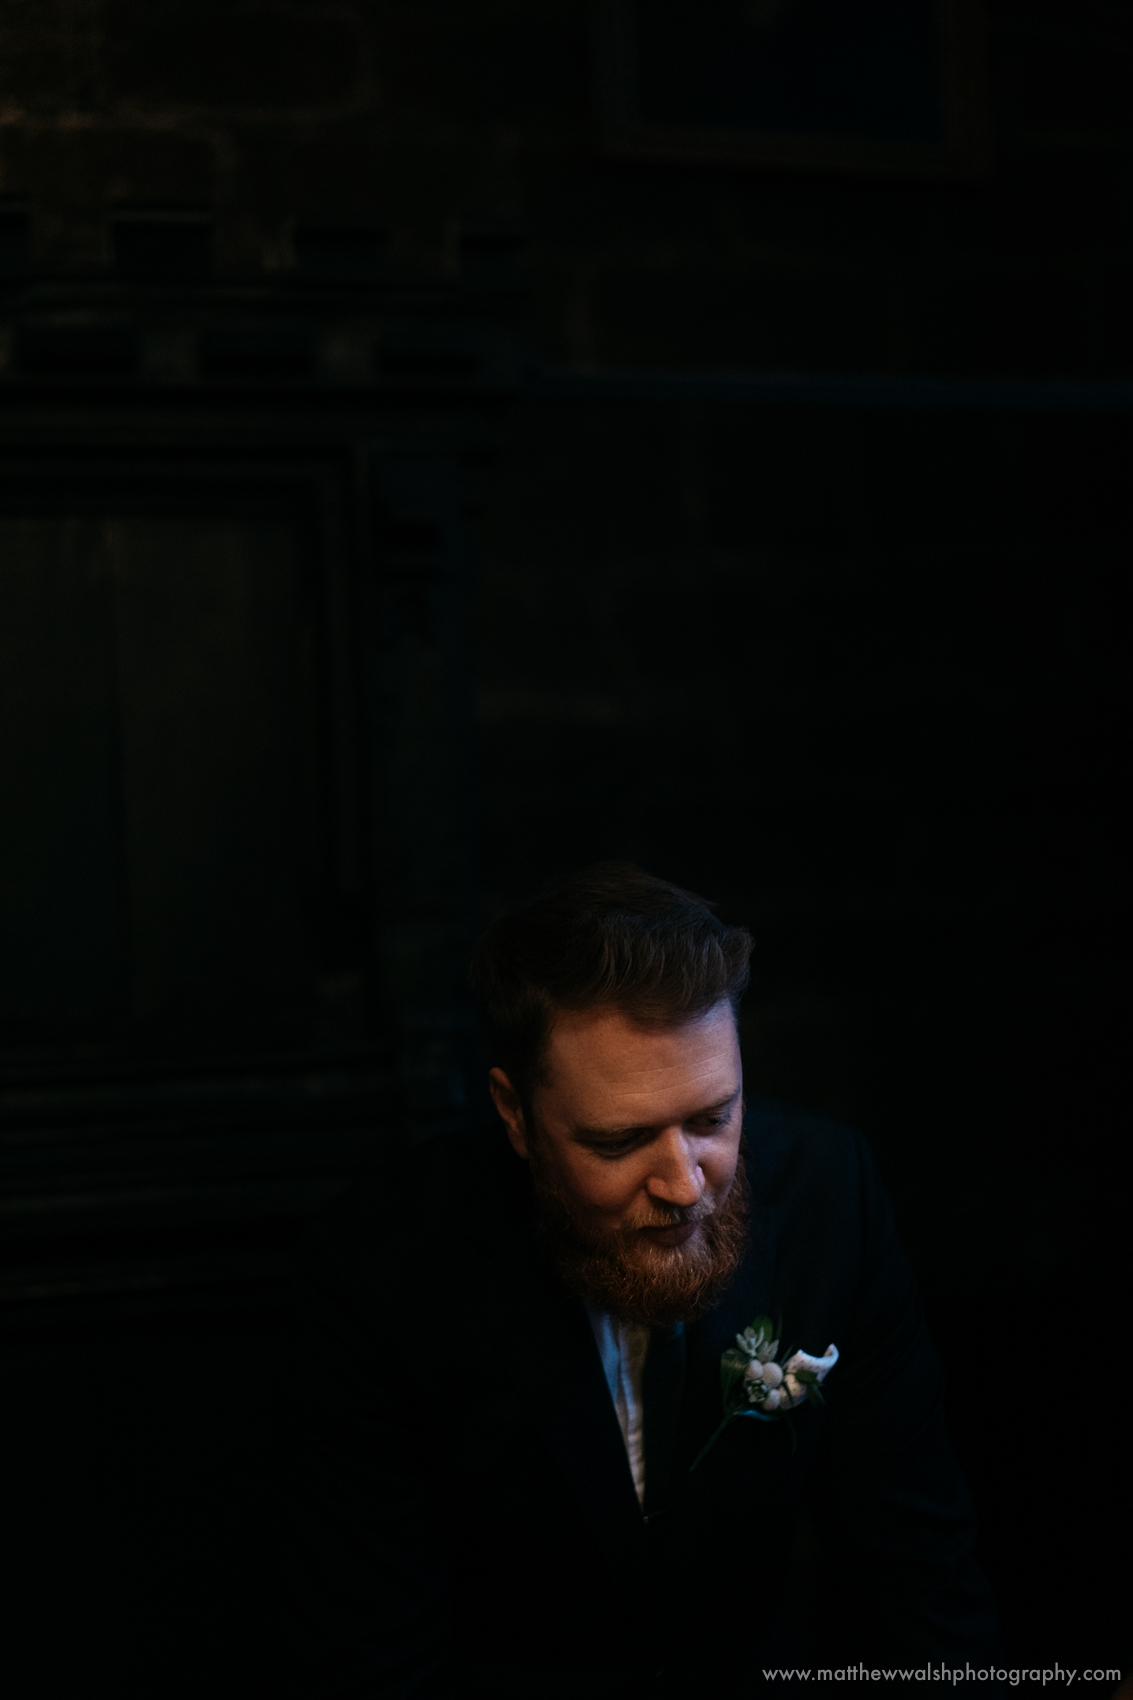 The groom making his final preparations in the dark light of the wedding venue